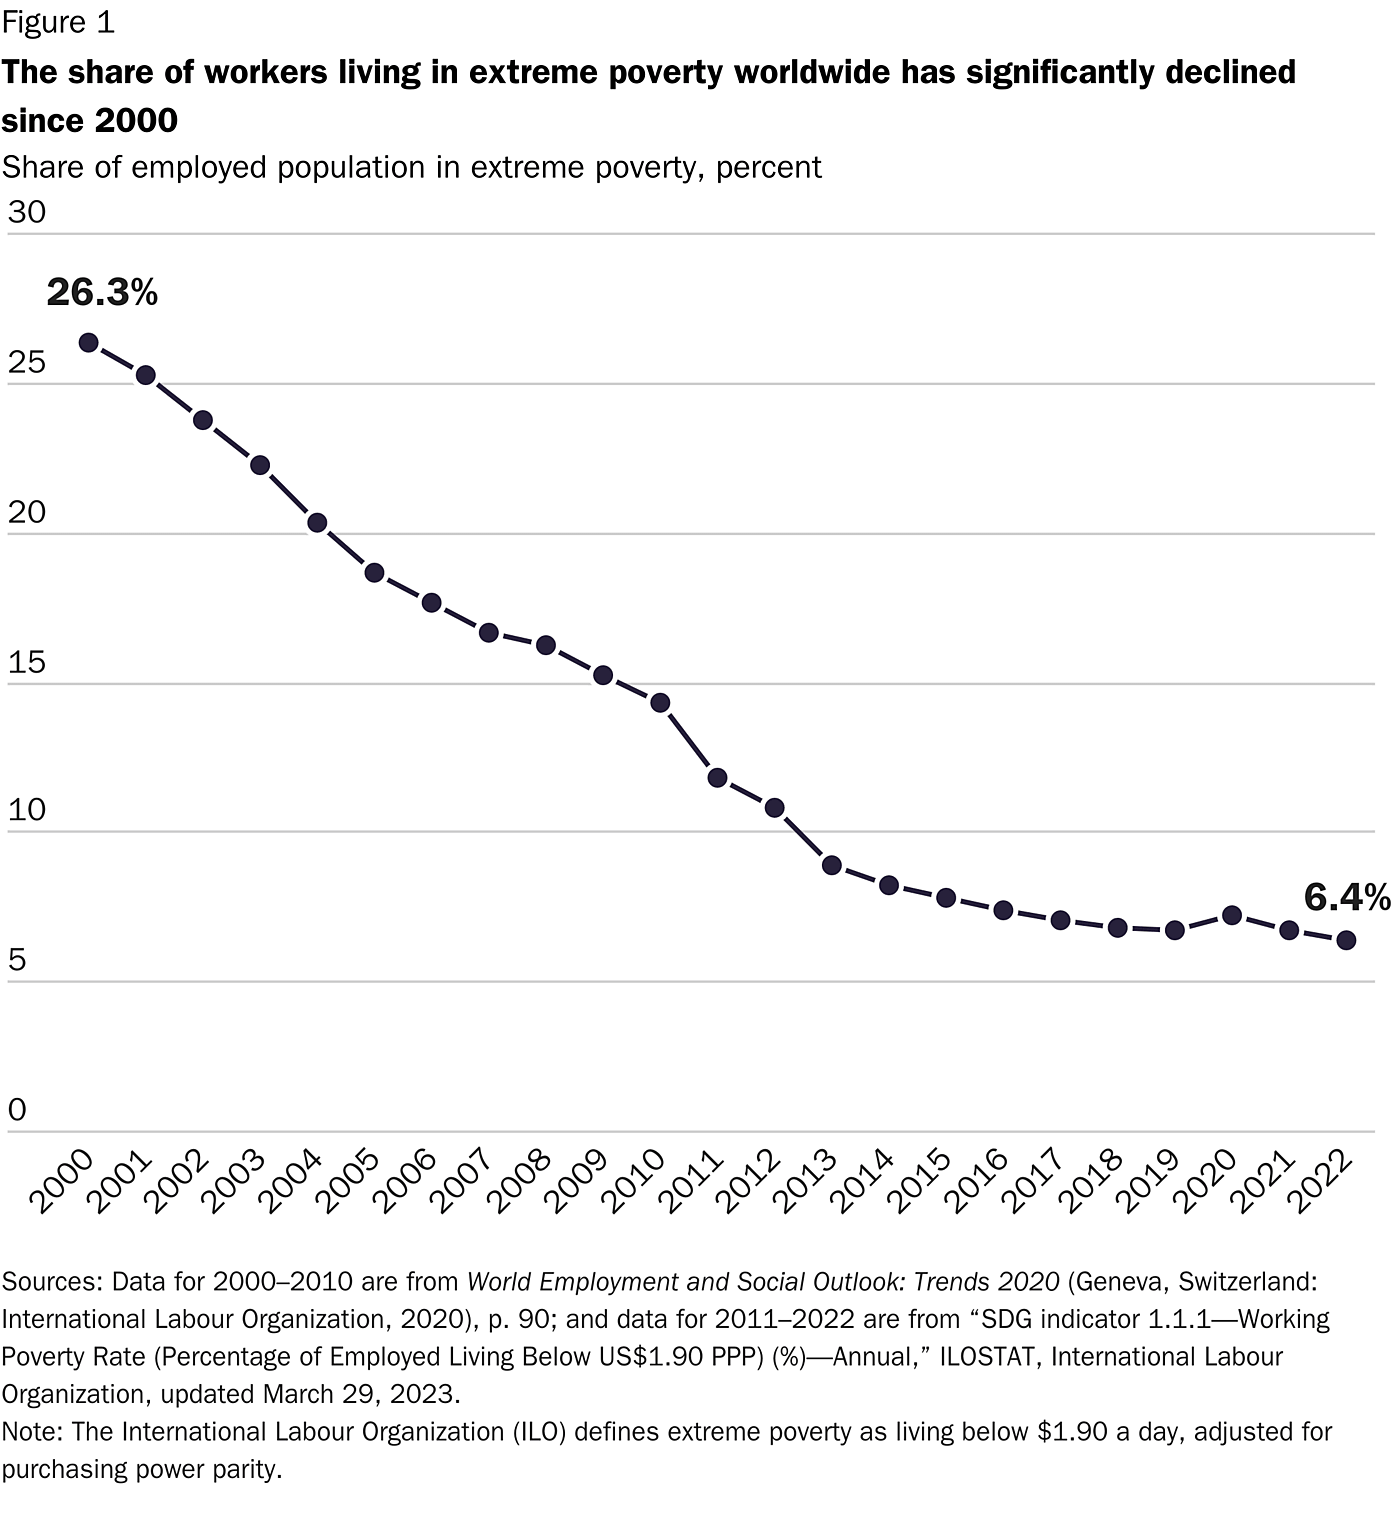 figure-1-the-share-of-workers-living-in-extreme-poverty-worldwide-has-significantly-declined-since-2000.png